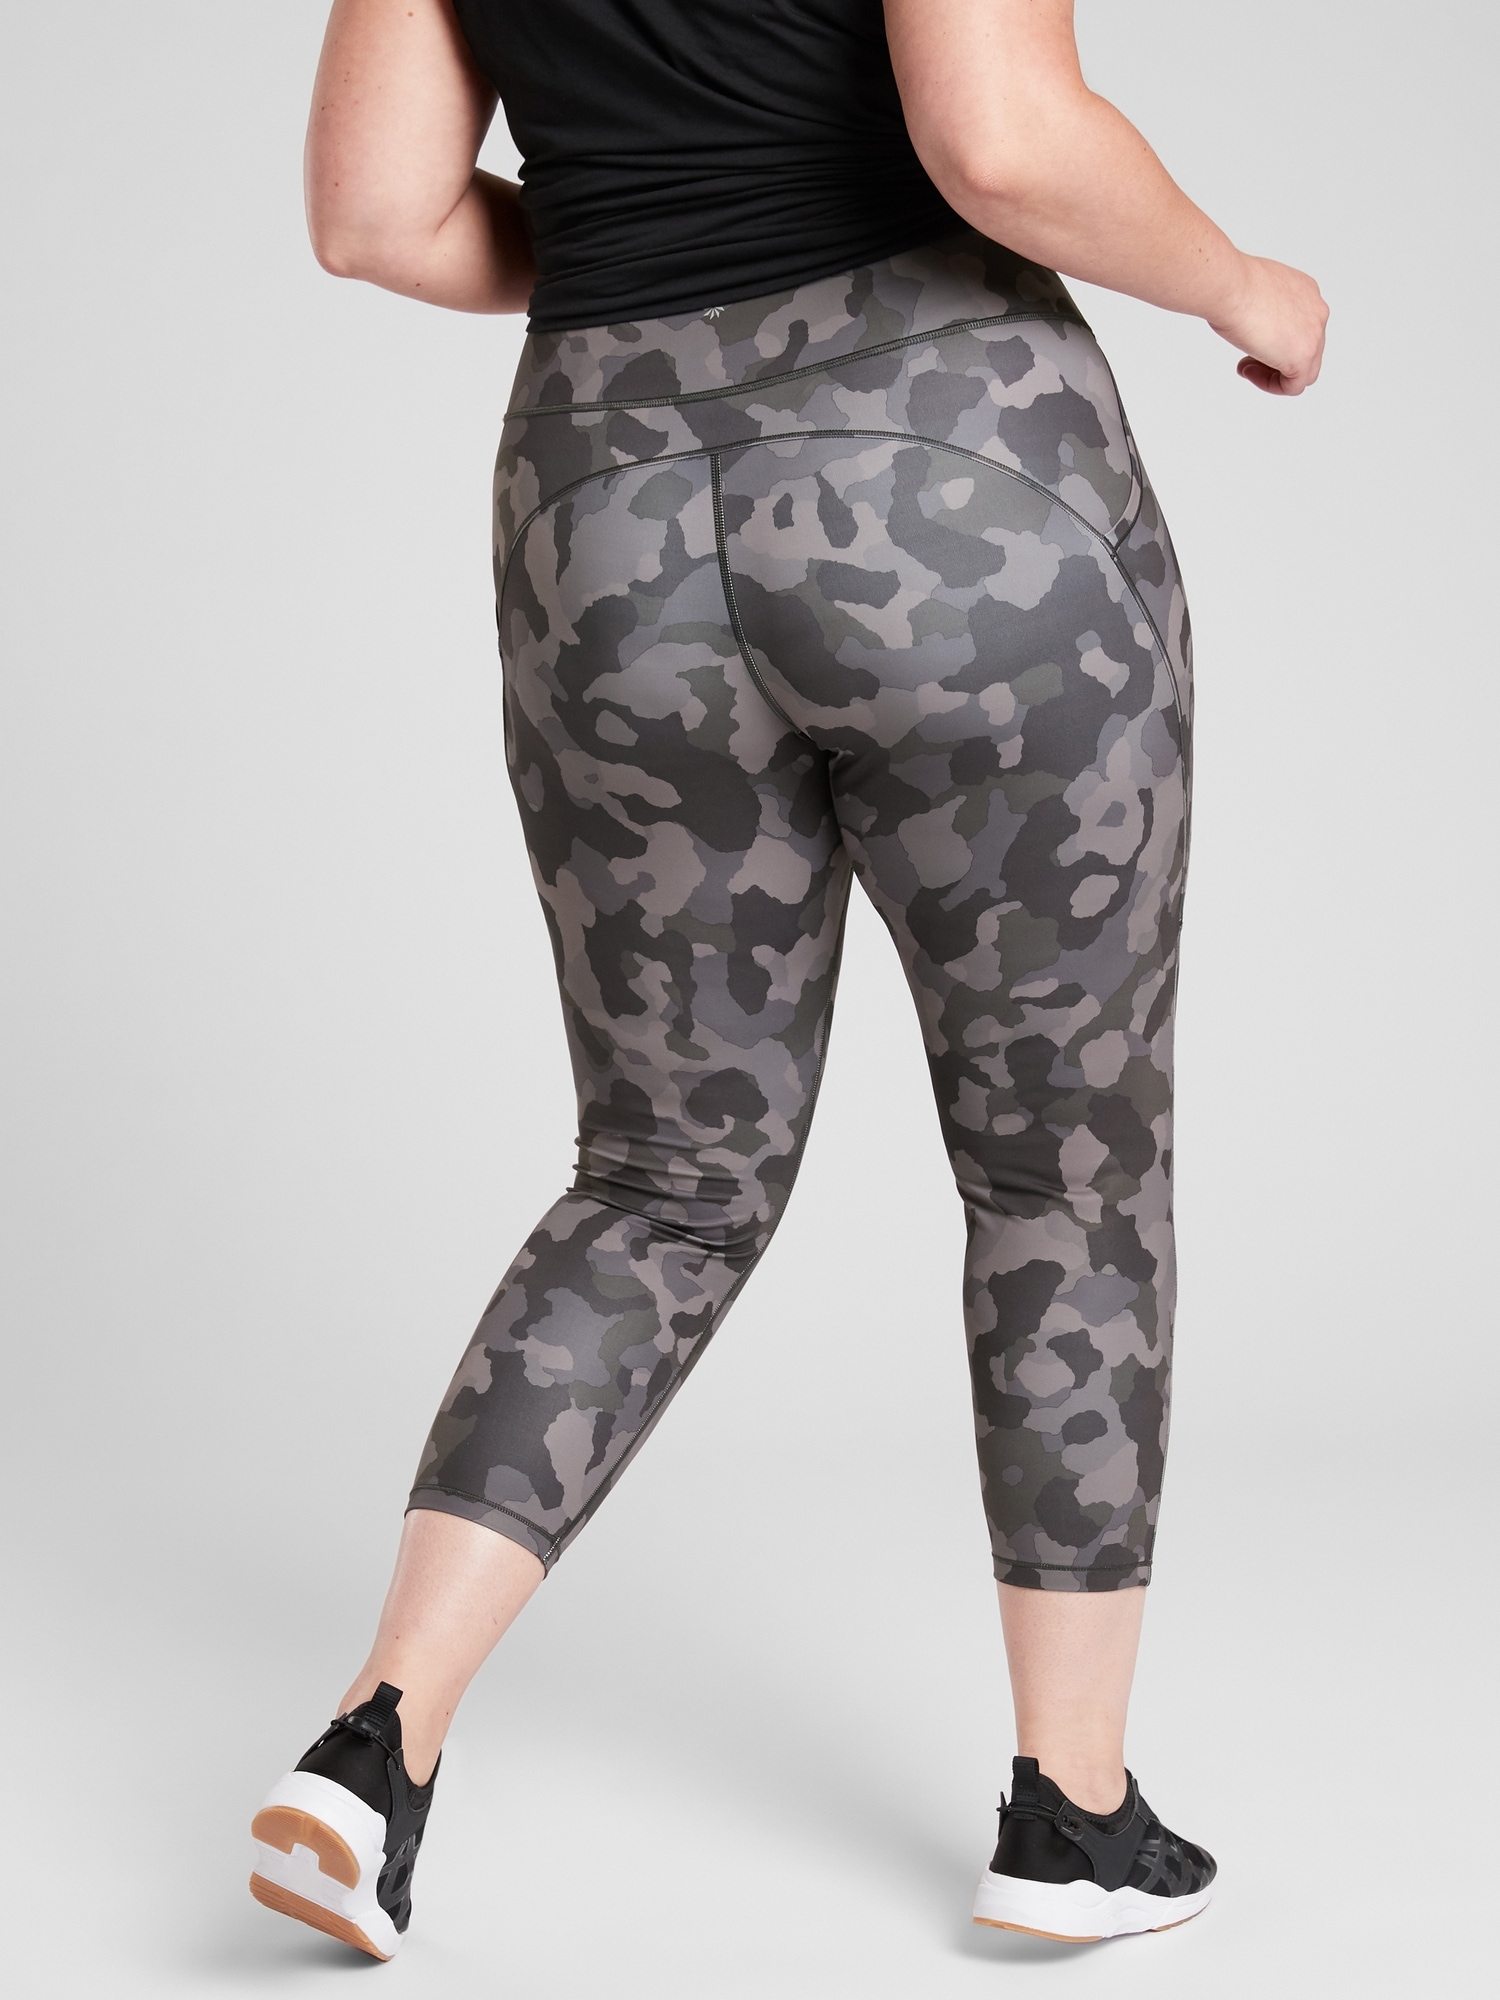 Love! Athleta camo leggings 12 $16.99! ✨Don't forget…You can pick